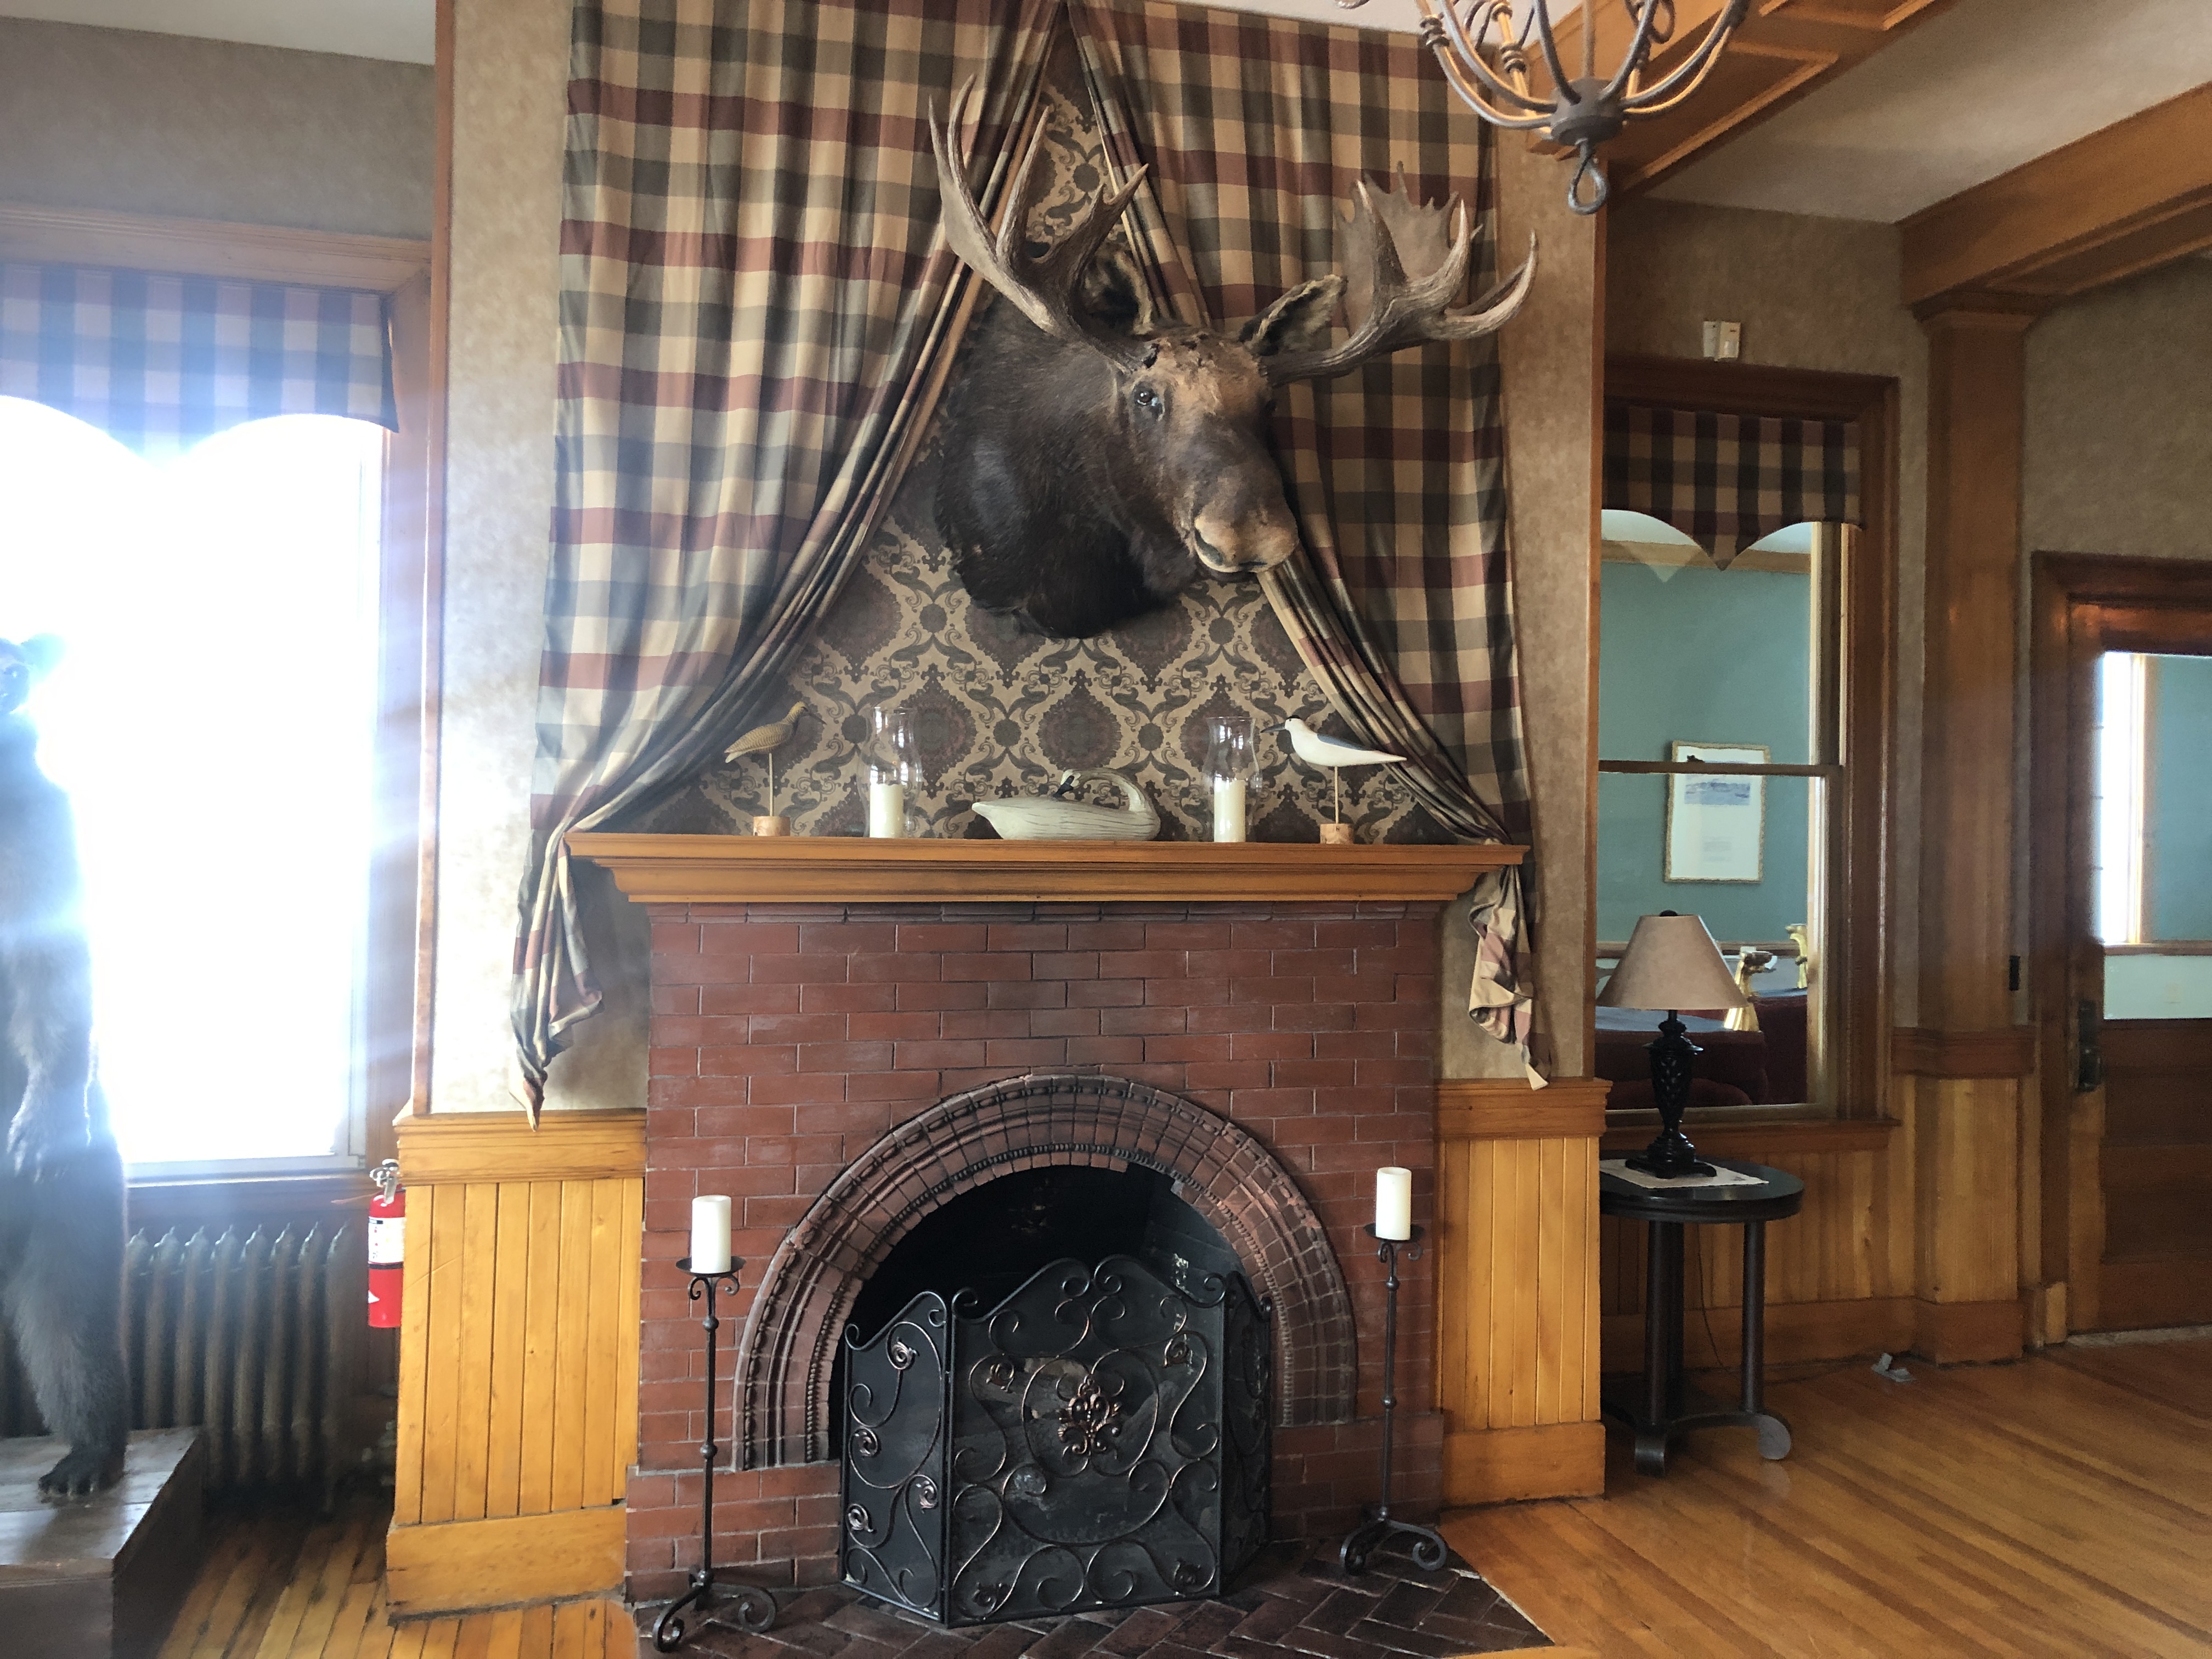 The bull moose above the fireplace at the Rangeley Inn in Maine.